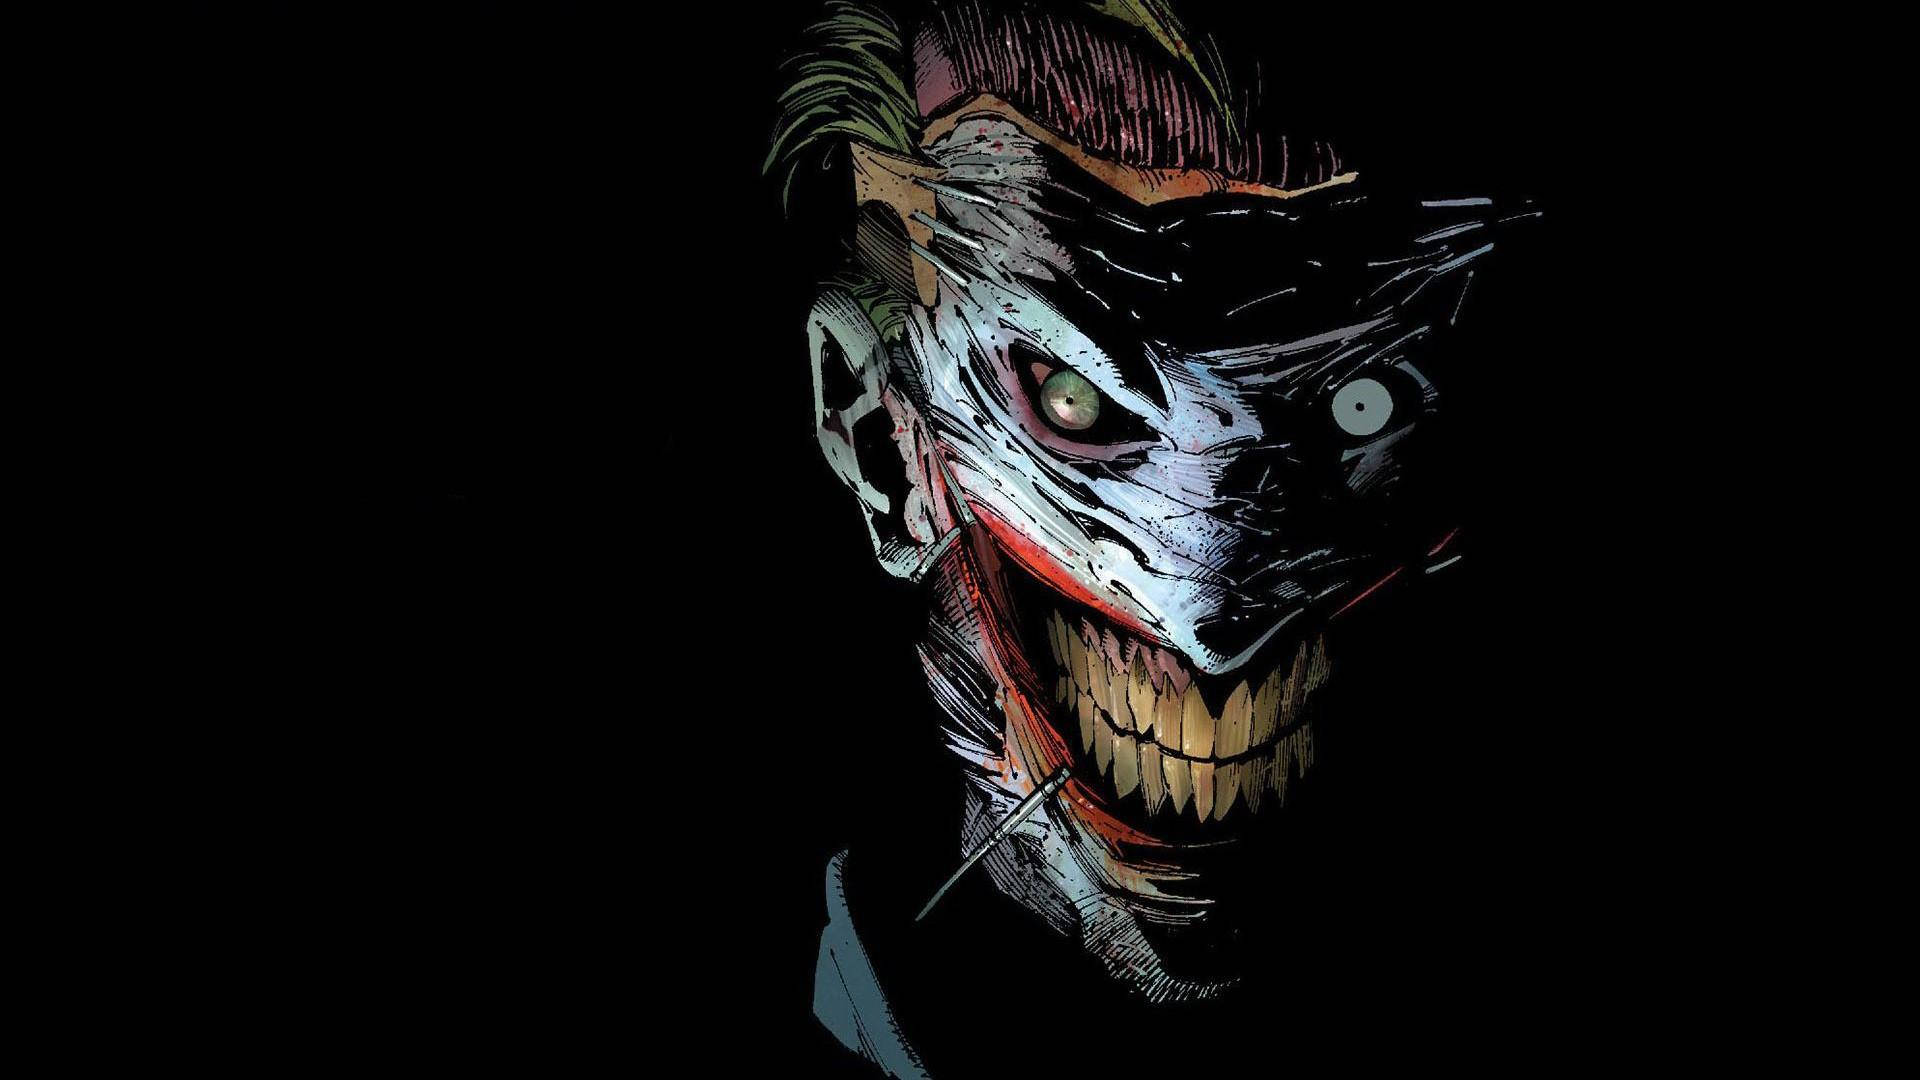 “the Shadow Of The Joker” Background